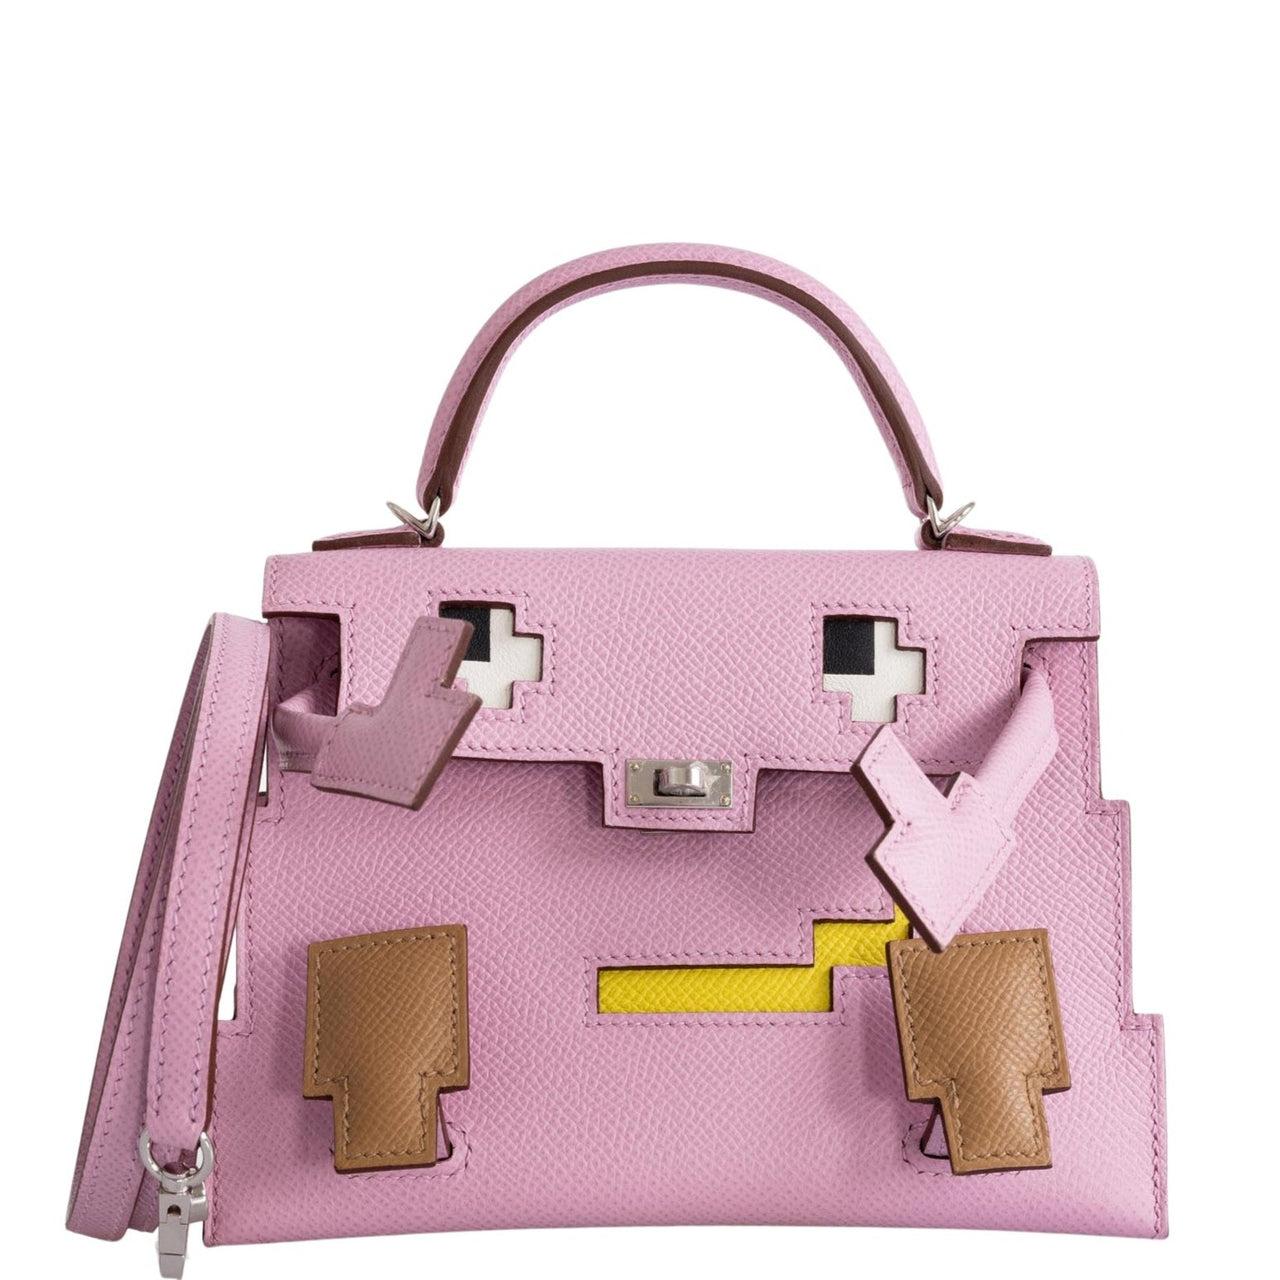 Pink Thing of The Day: Rare Pink Hermes Kelly Doll Bag